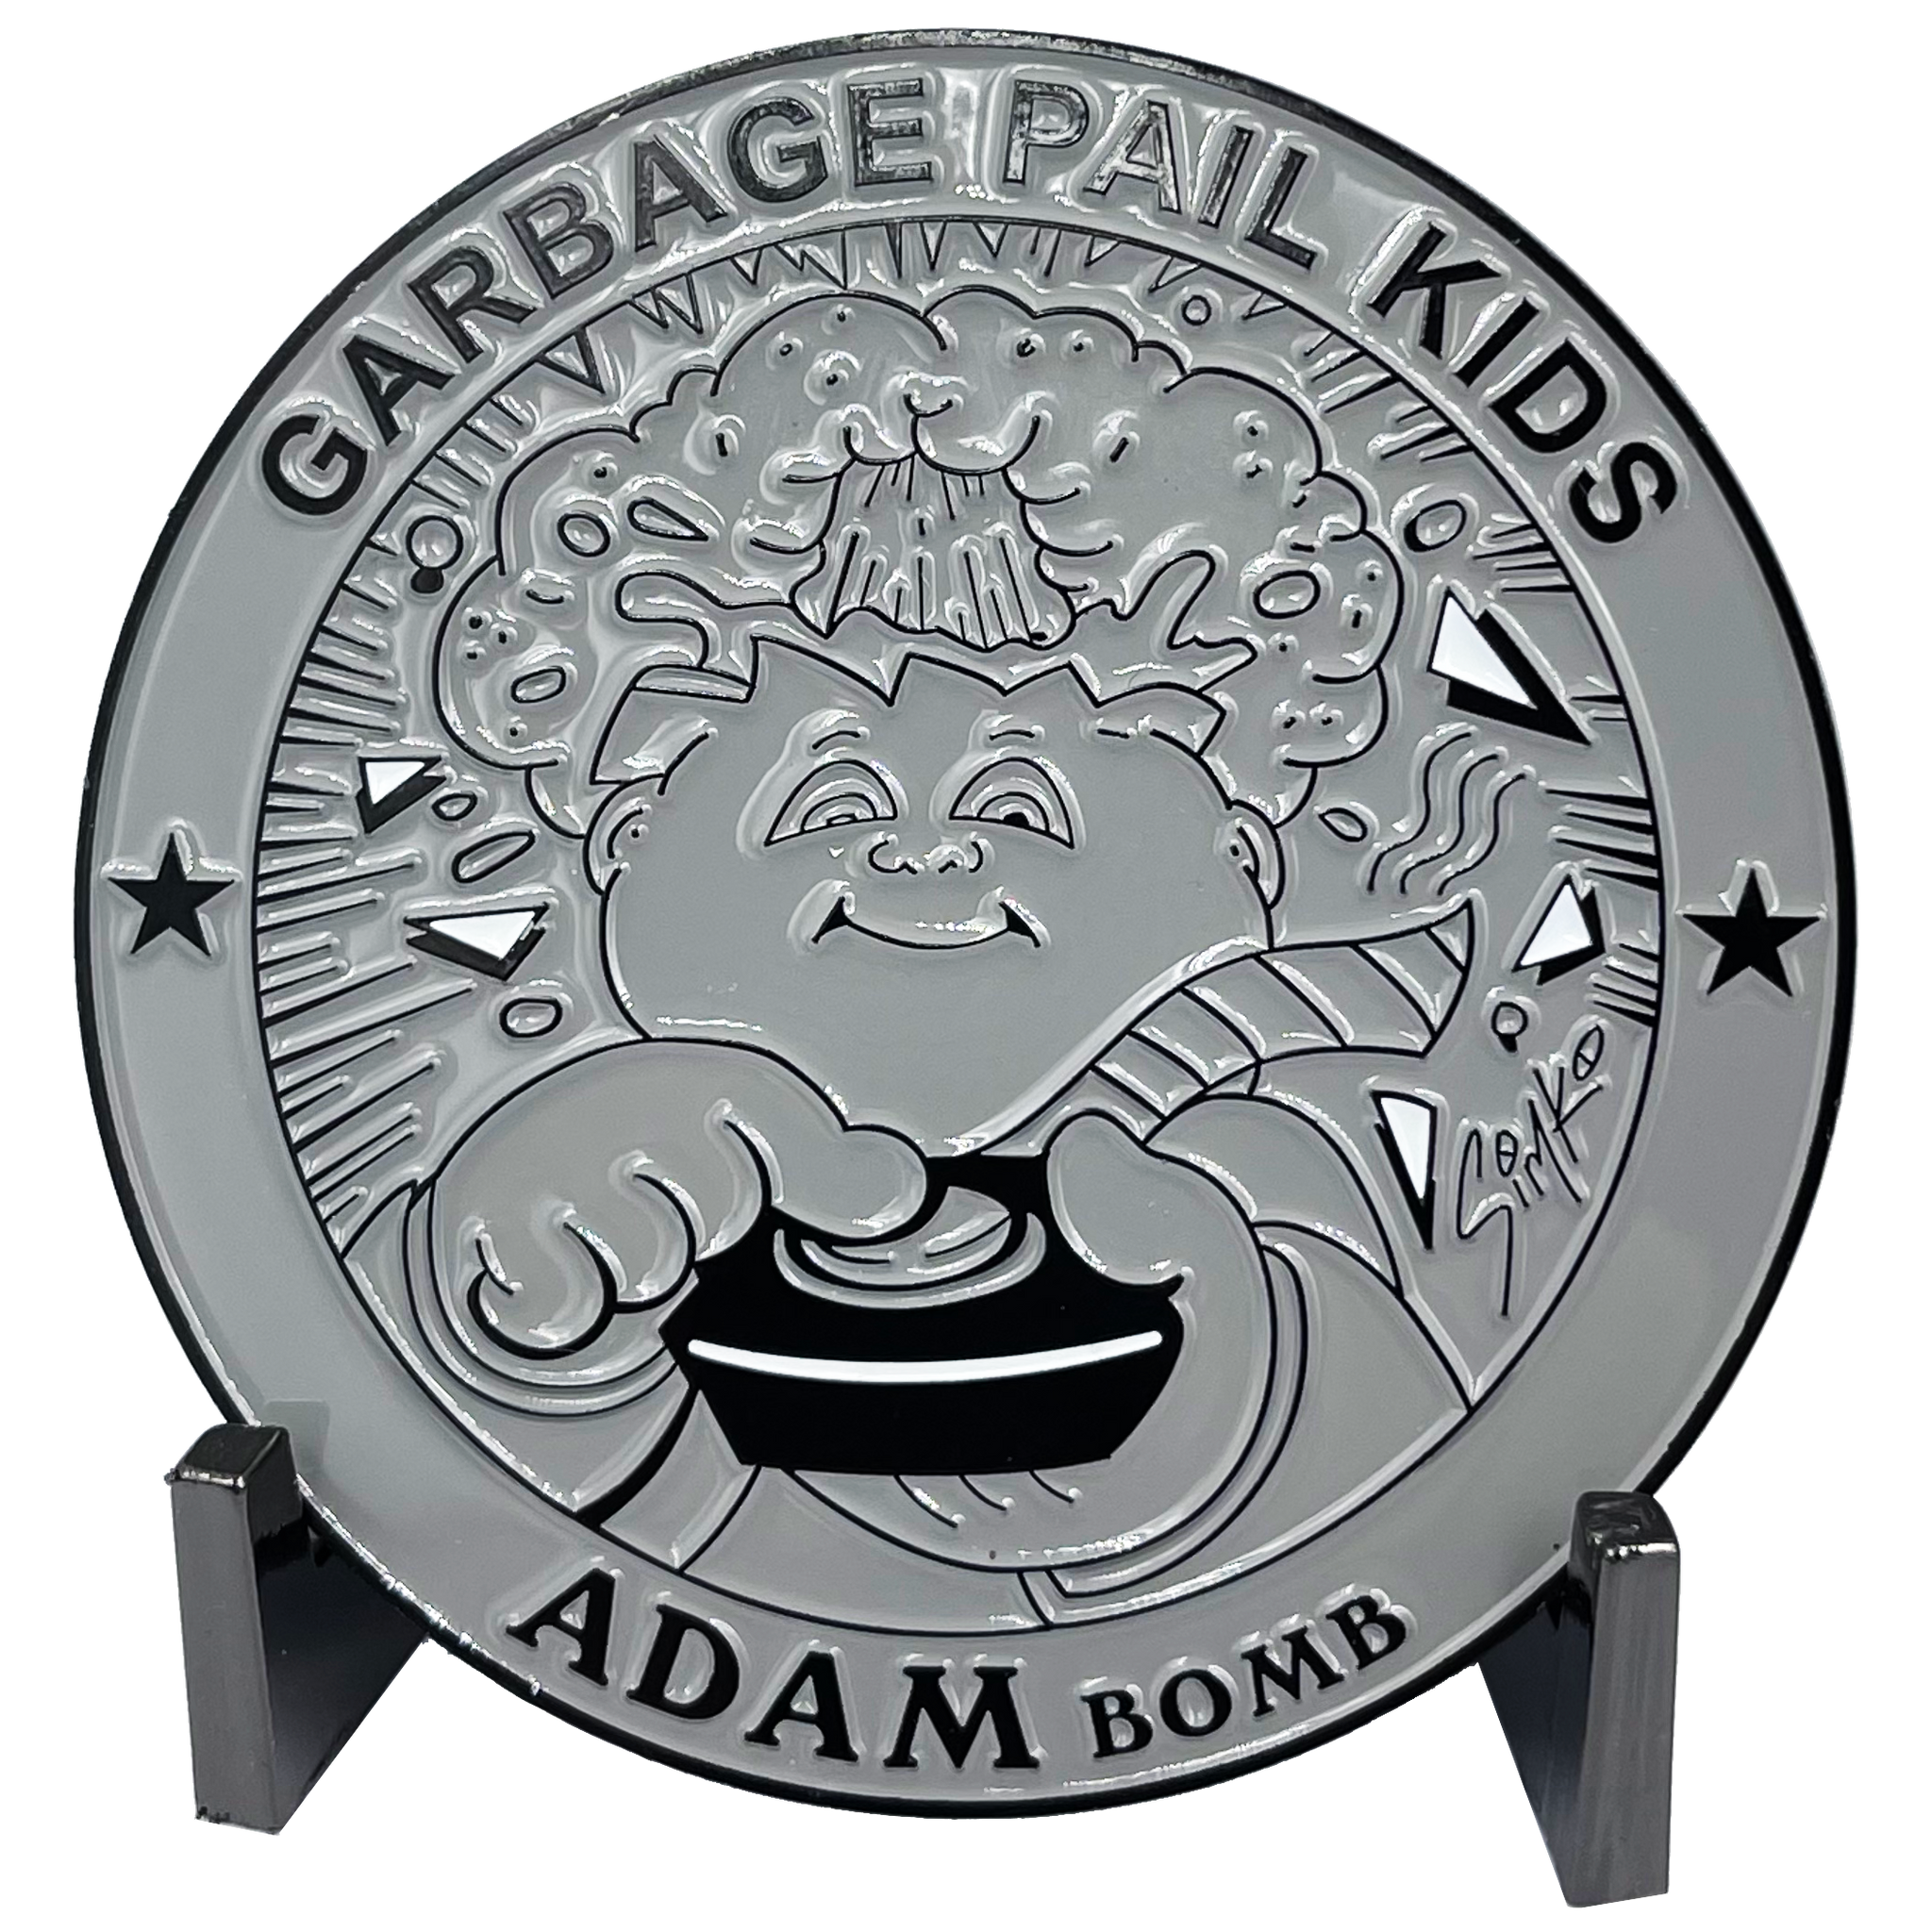 GPK-DD-007 Gray Variation 3 inch SIMKO Topps Officially Licensed Adam Bomb GPK Challenge Coin Garbage Pail Kids